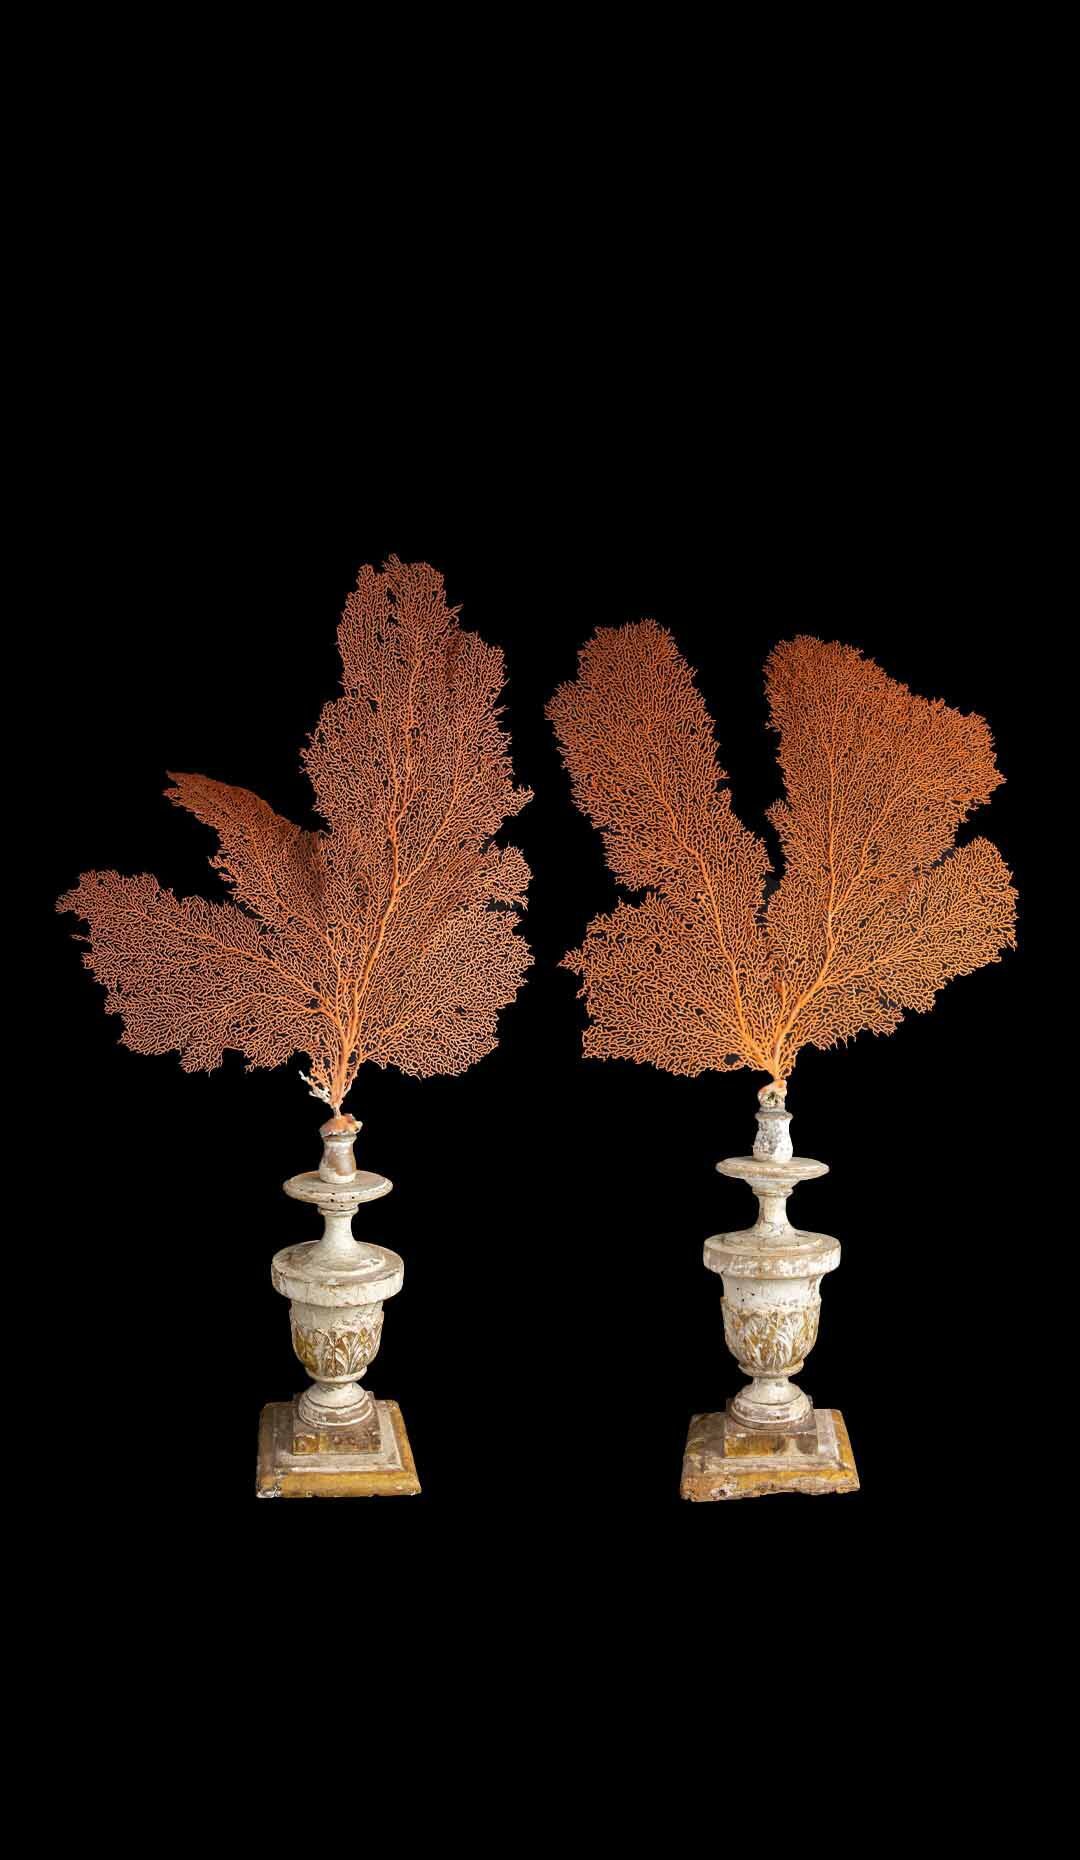 Pair of Orange Sea Fans Mounted on Italian Gilt and Painted Wooden Stands